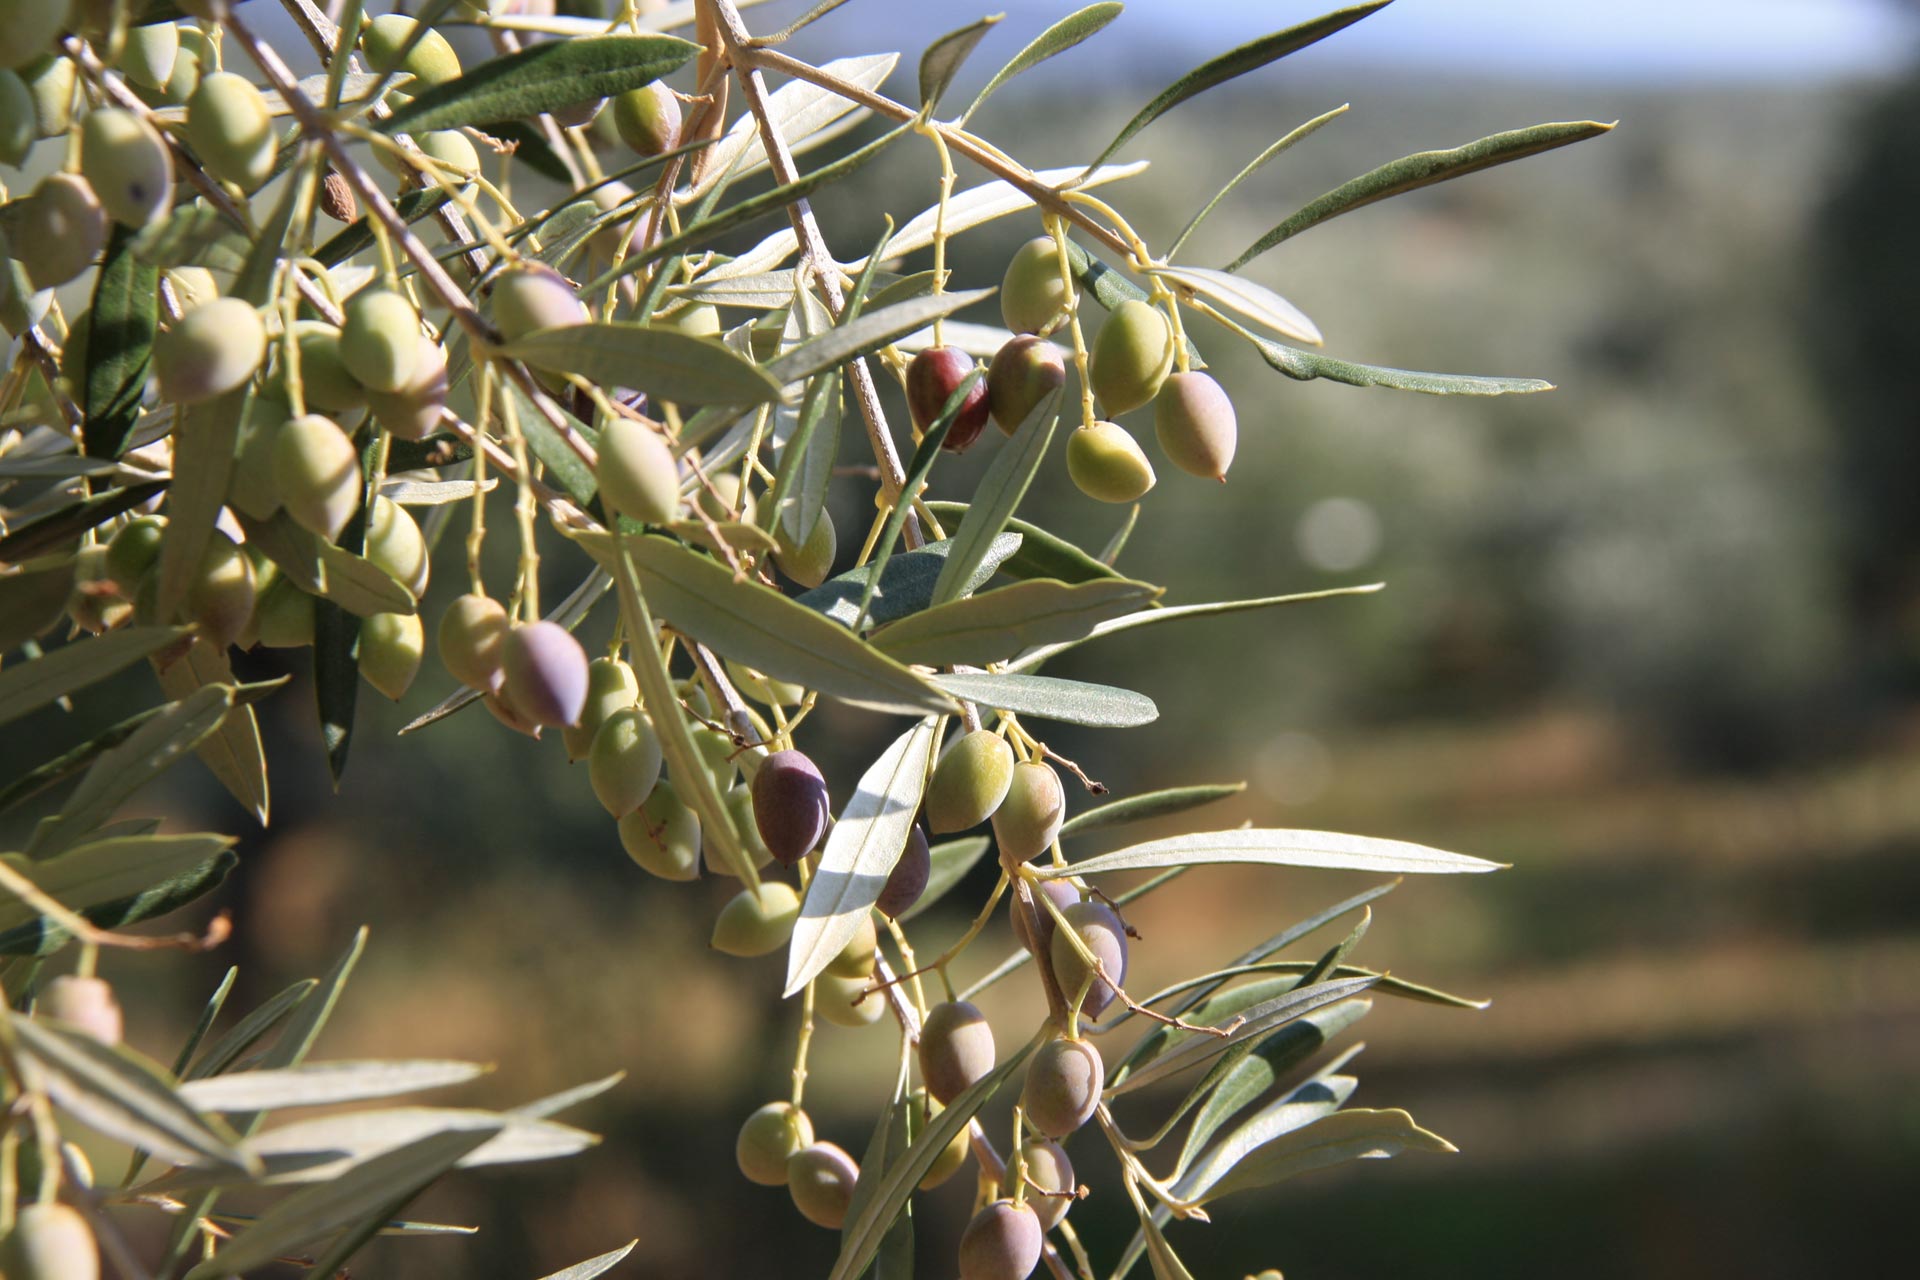 The olive fruit begins to ripen